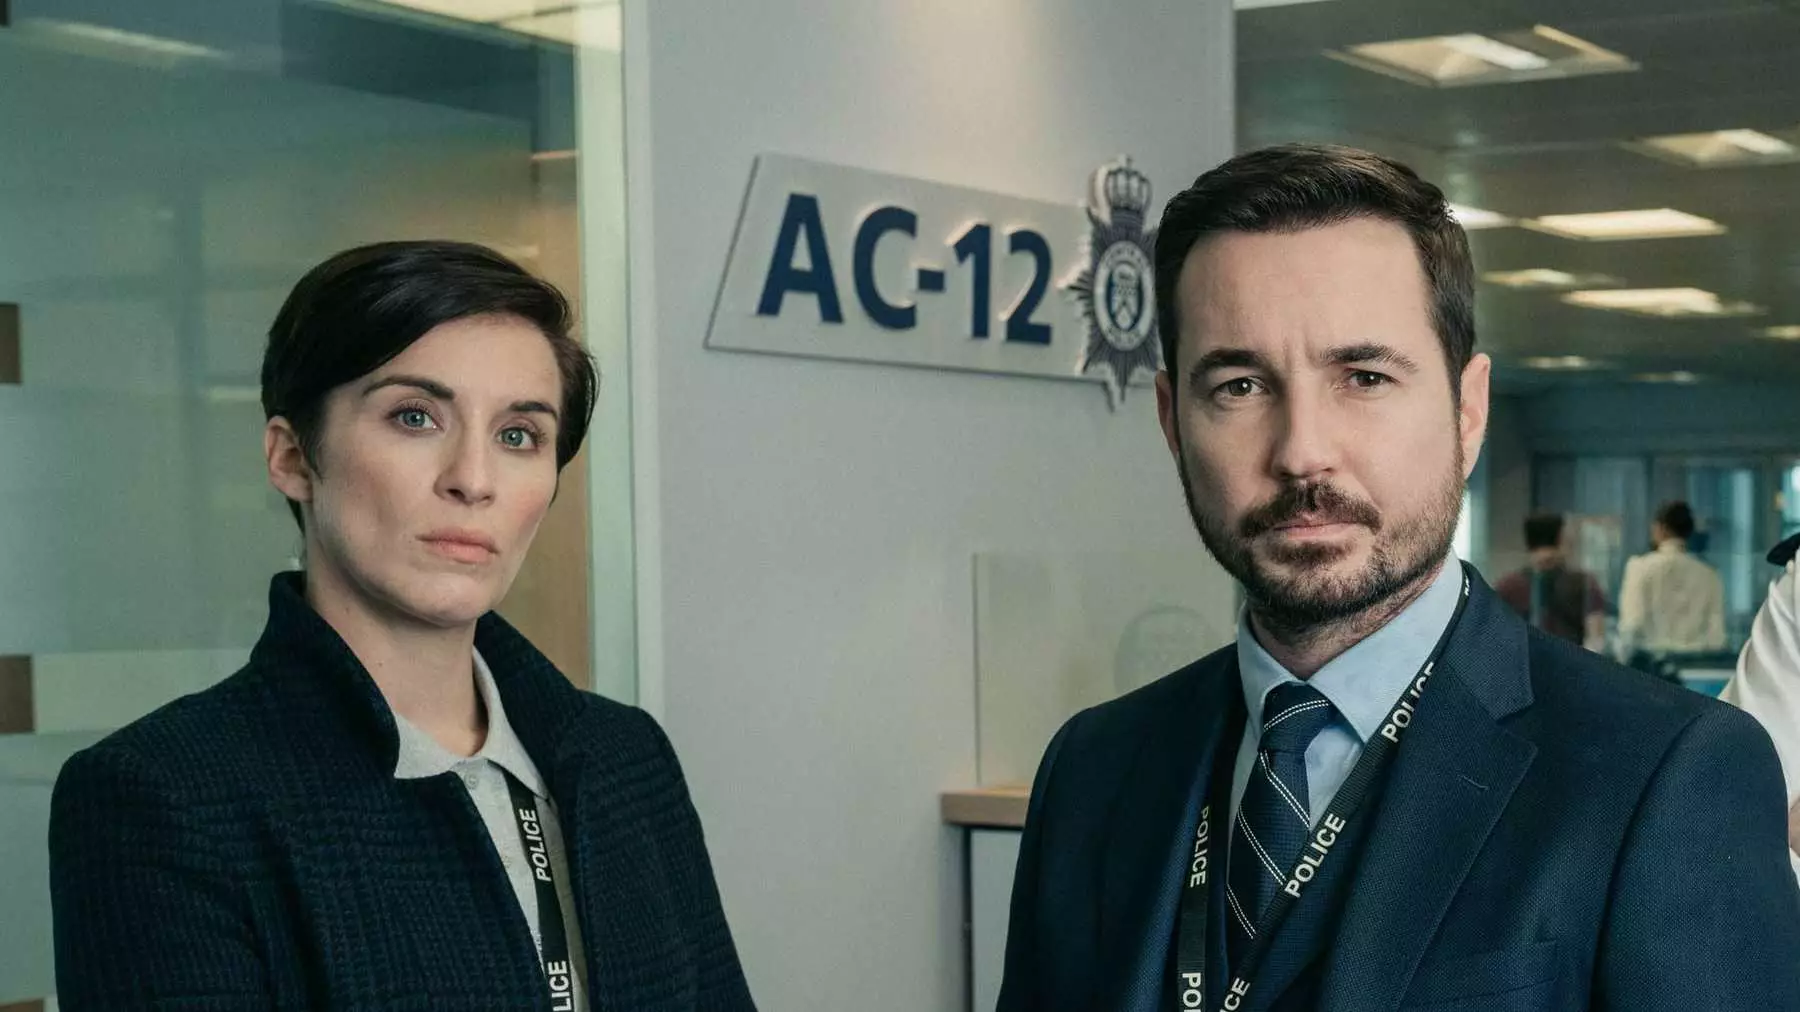 ITV's 'Trigger Point' sounds set to be another high octane drama like 'Line of Duty' (